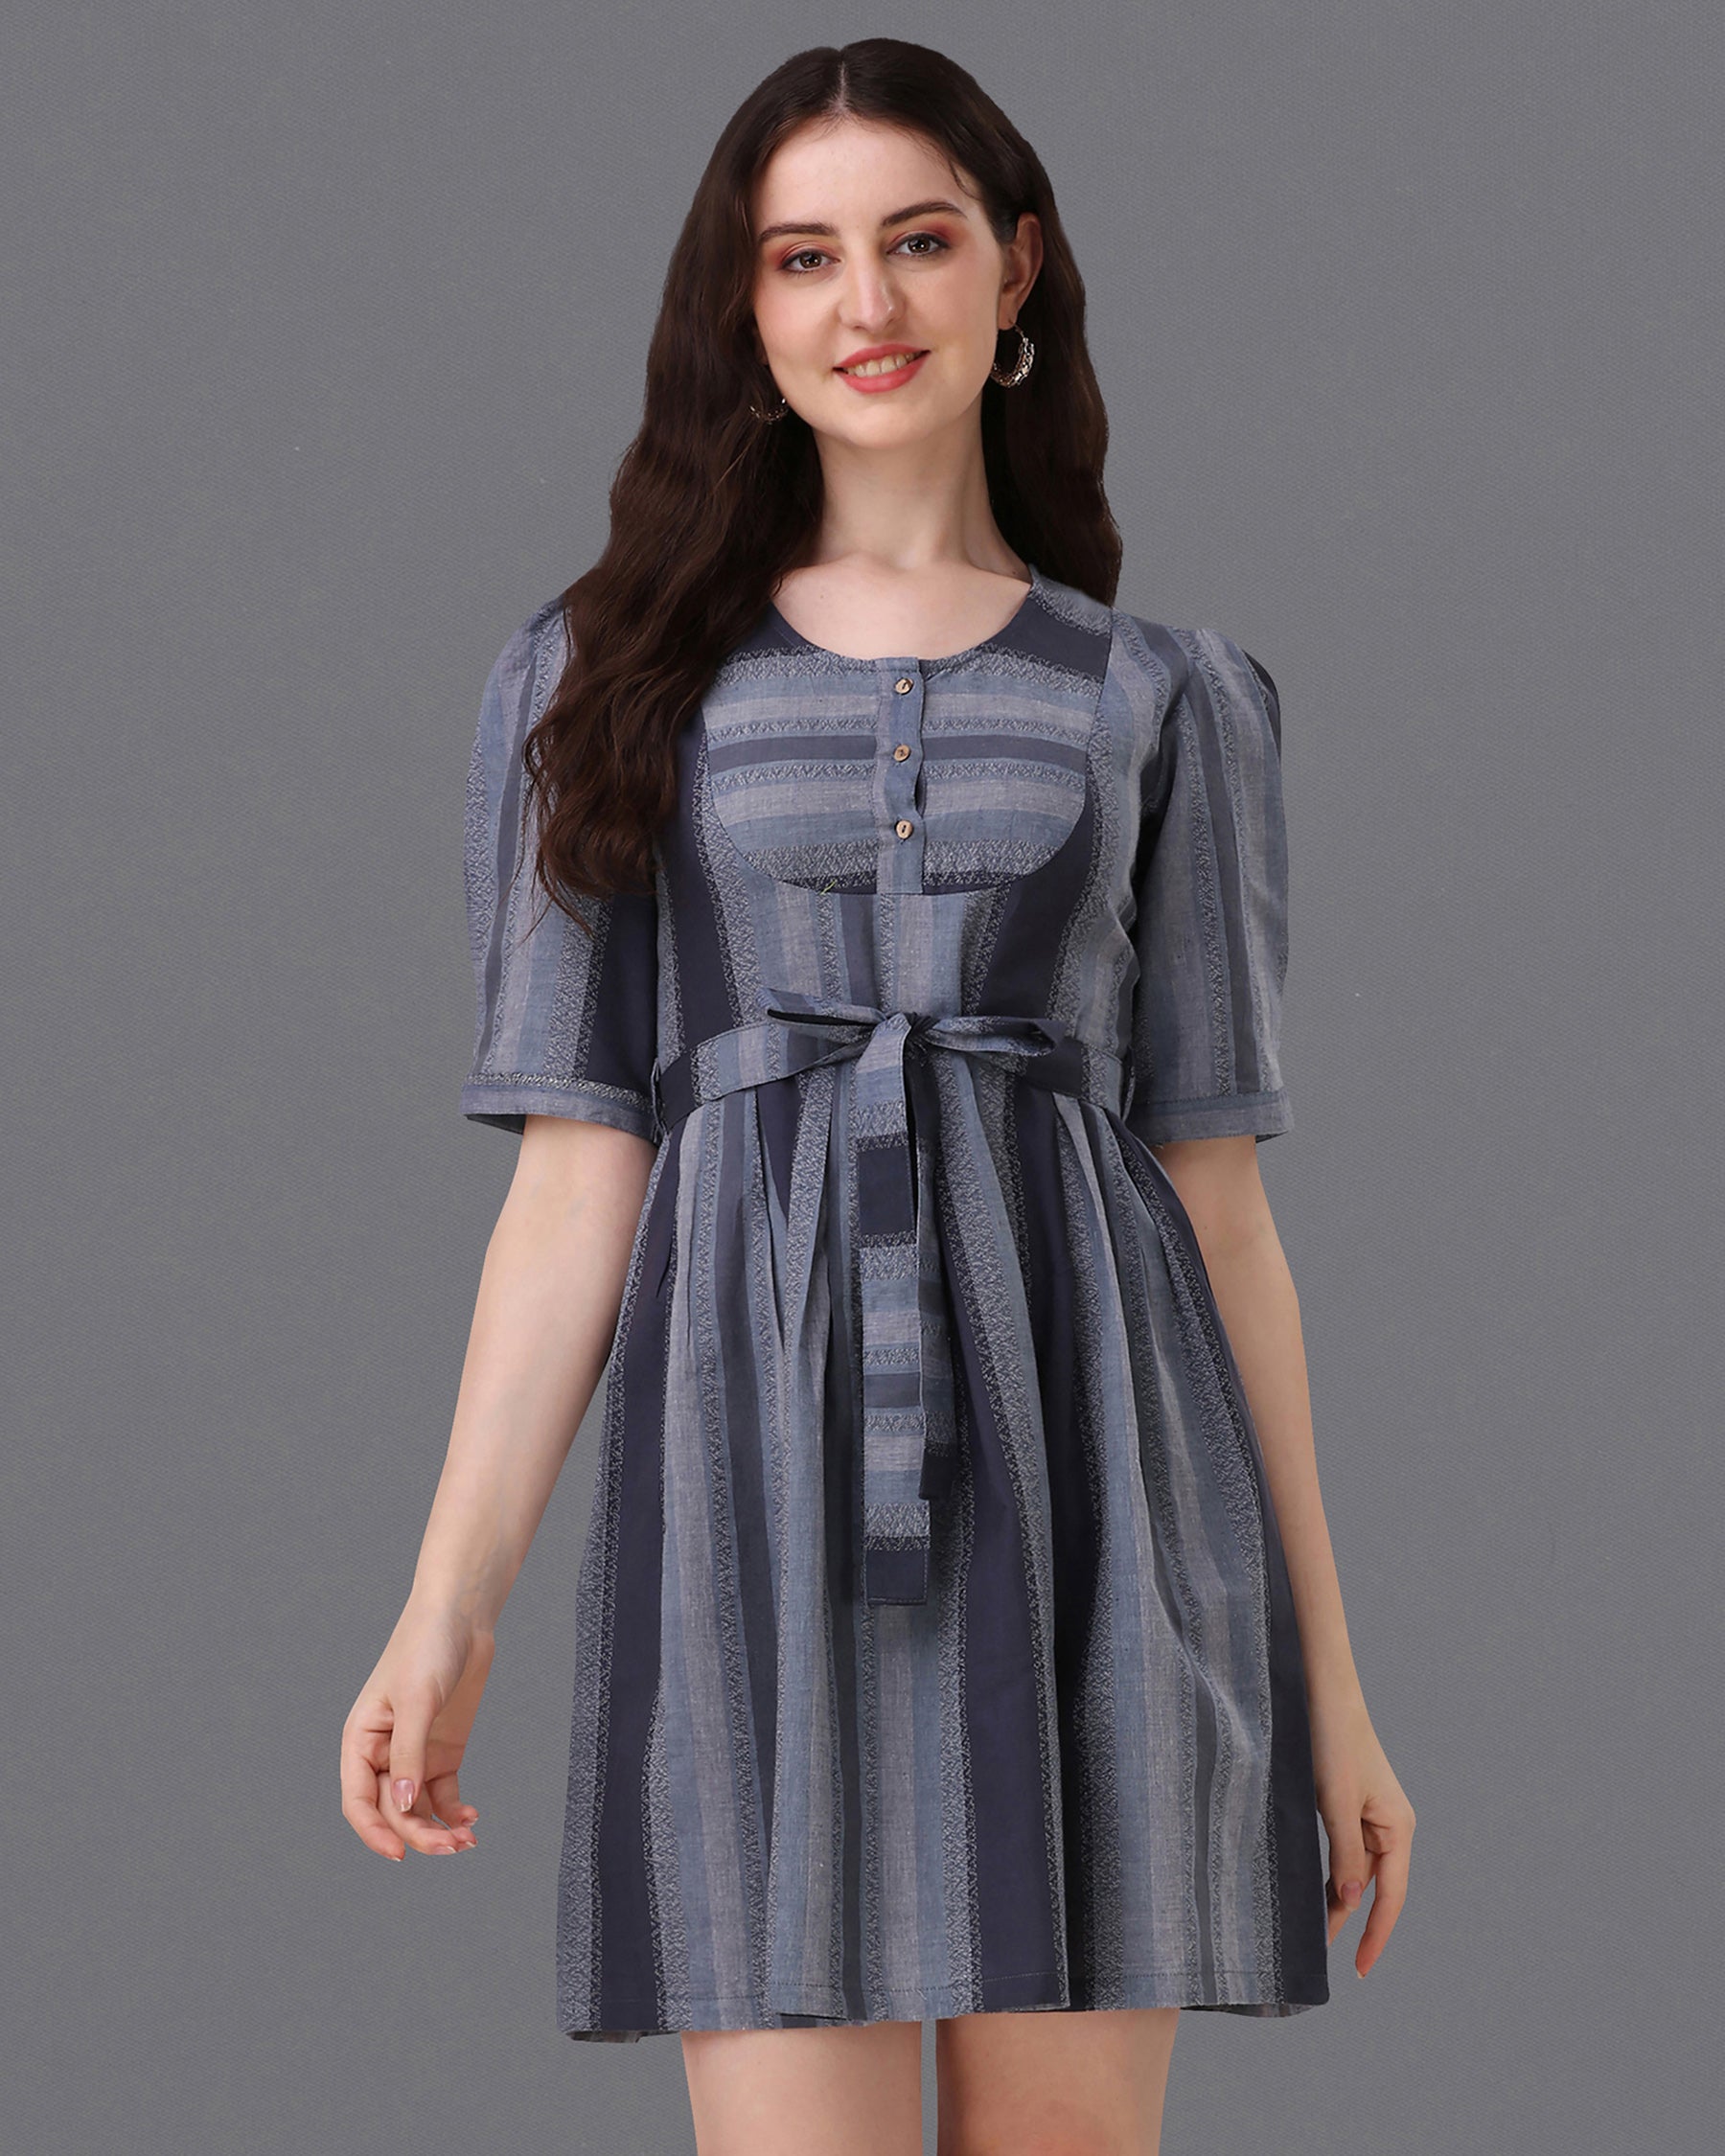 Iridium Blue with Mobster Gray Super Soft Premium Cotton Thigh Length Dress WD036-32, WD036-34, WD036-36, WD036-38, WD036-40, WD036-42